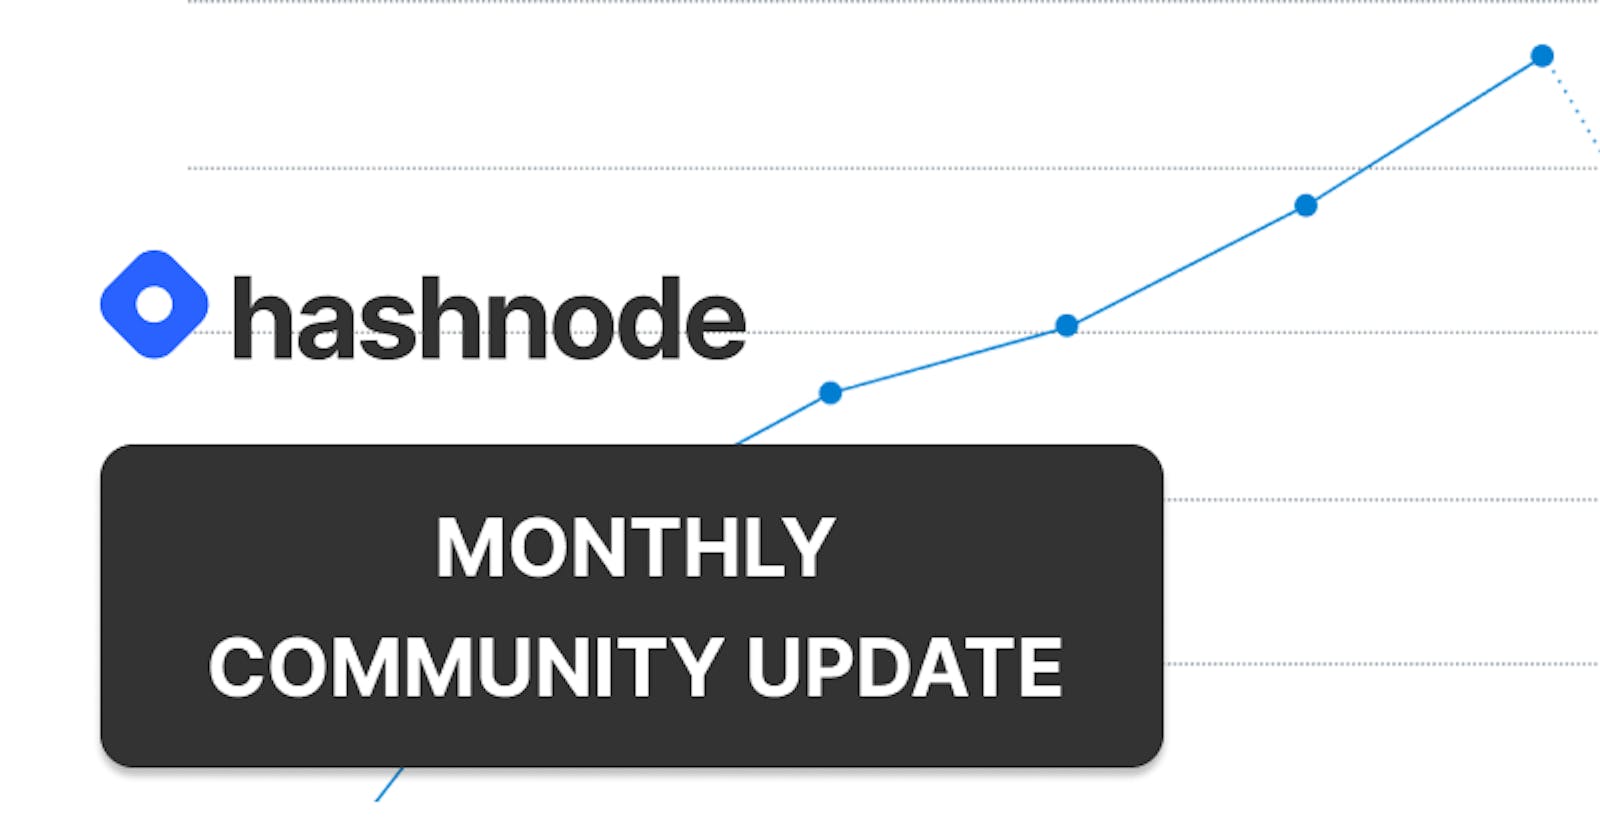 Hashnode July Update: 1500 new blogs, 600,000 views and 180,000 unique users